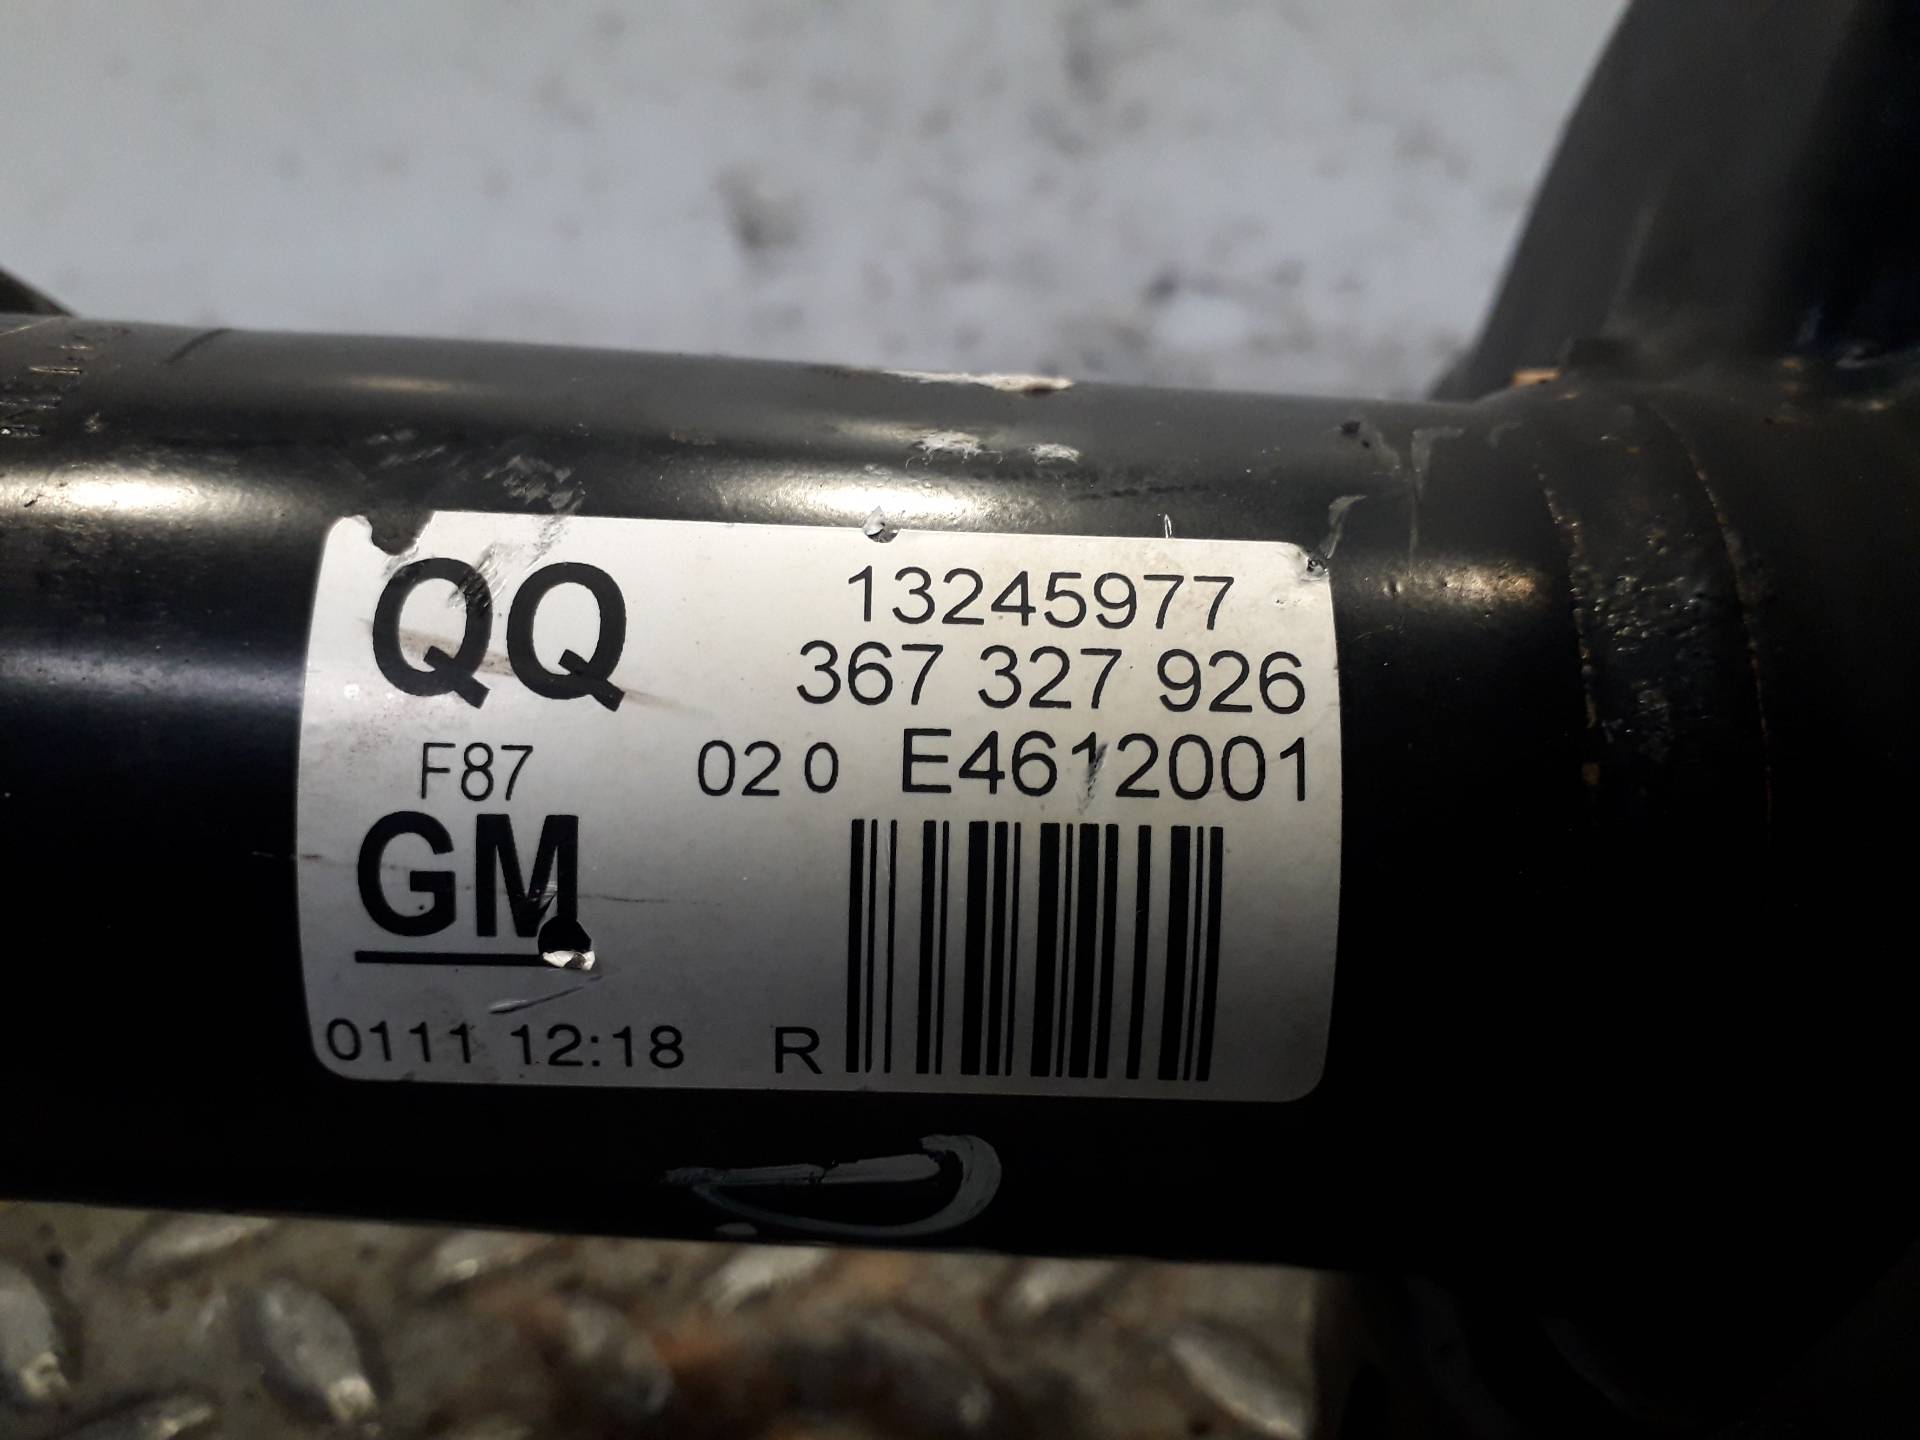 OPEL Insignia A (2008-2016) Front Right Shock Absorber 13245977, 367327926, A4610401 23703472